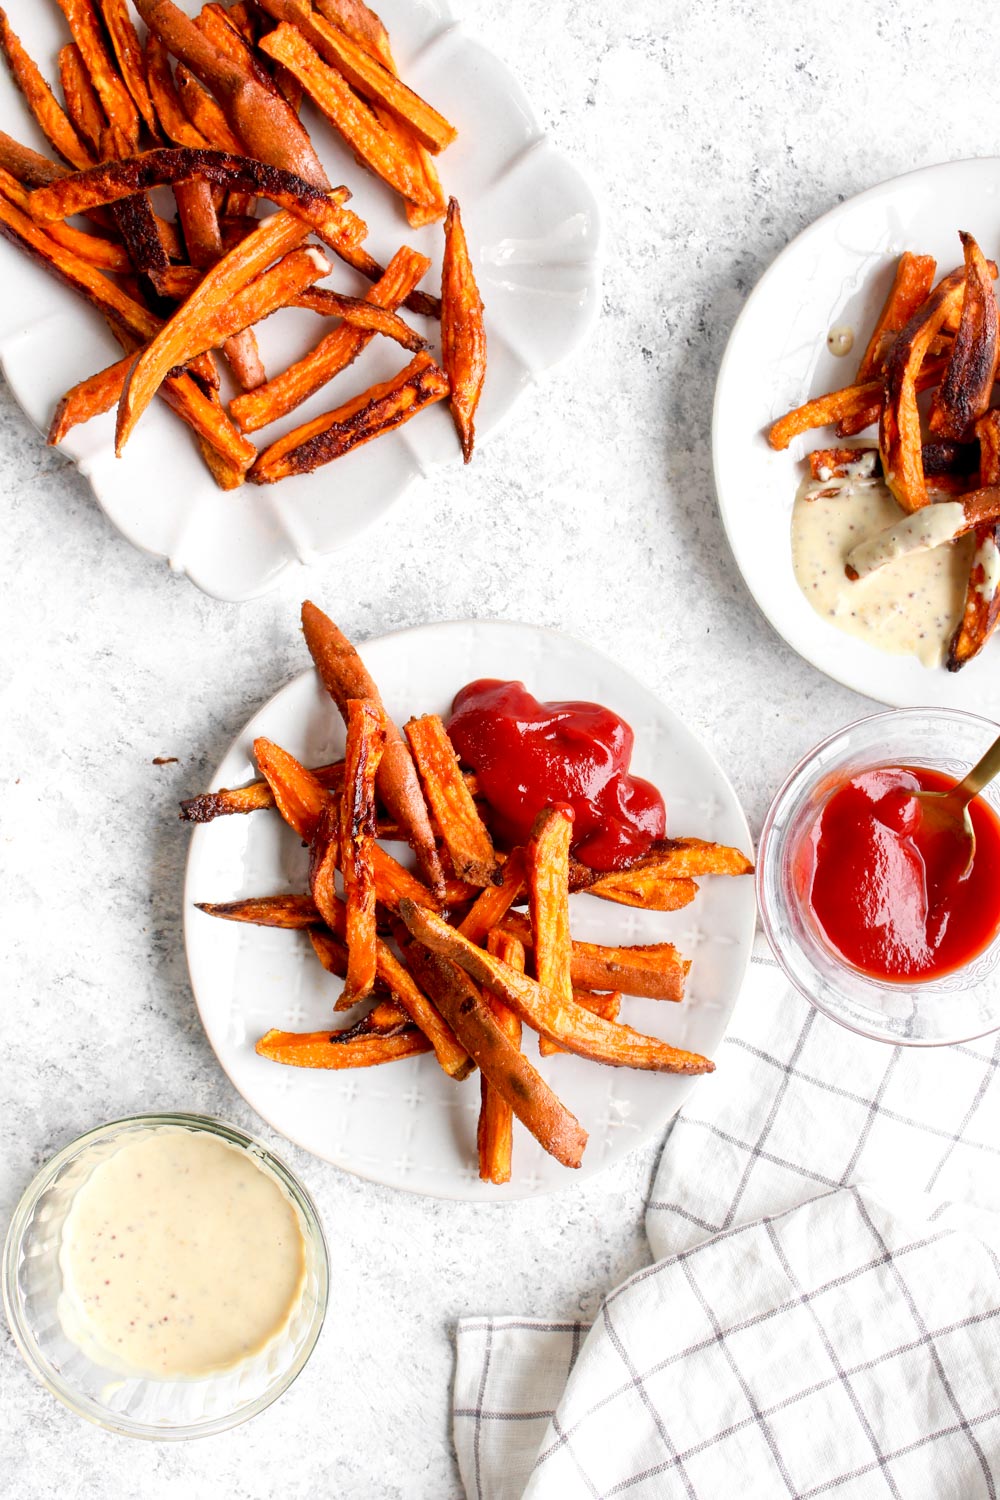 Seasoned sweet potato fries on a white plate with ketchup.